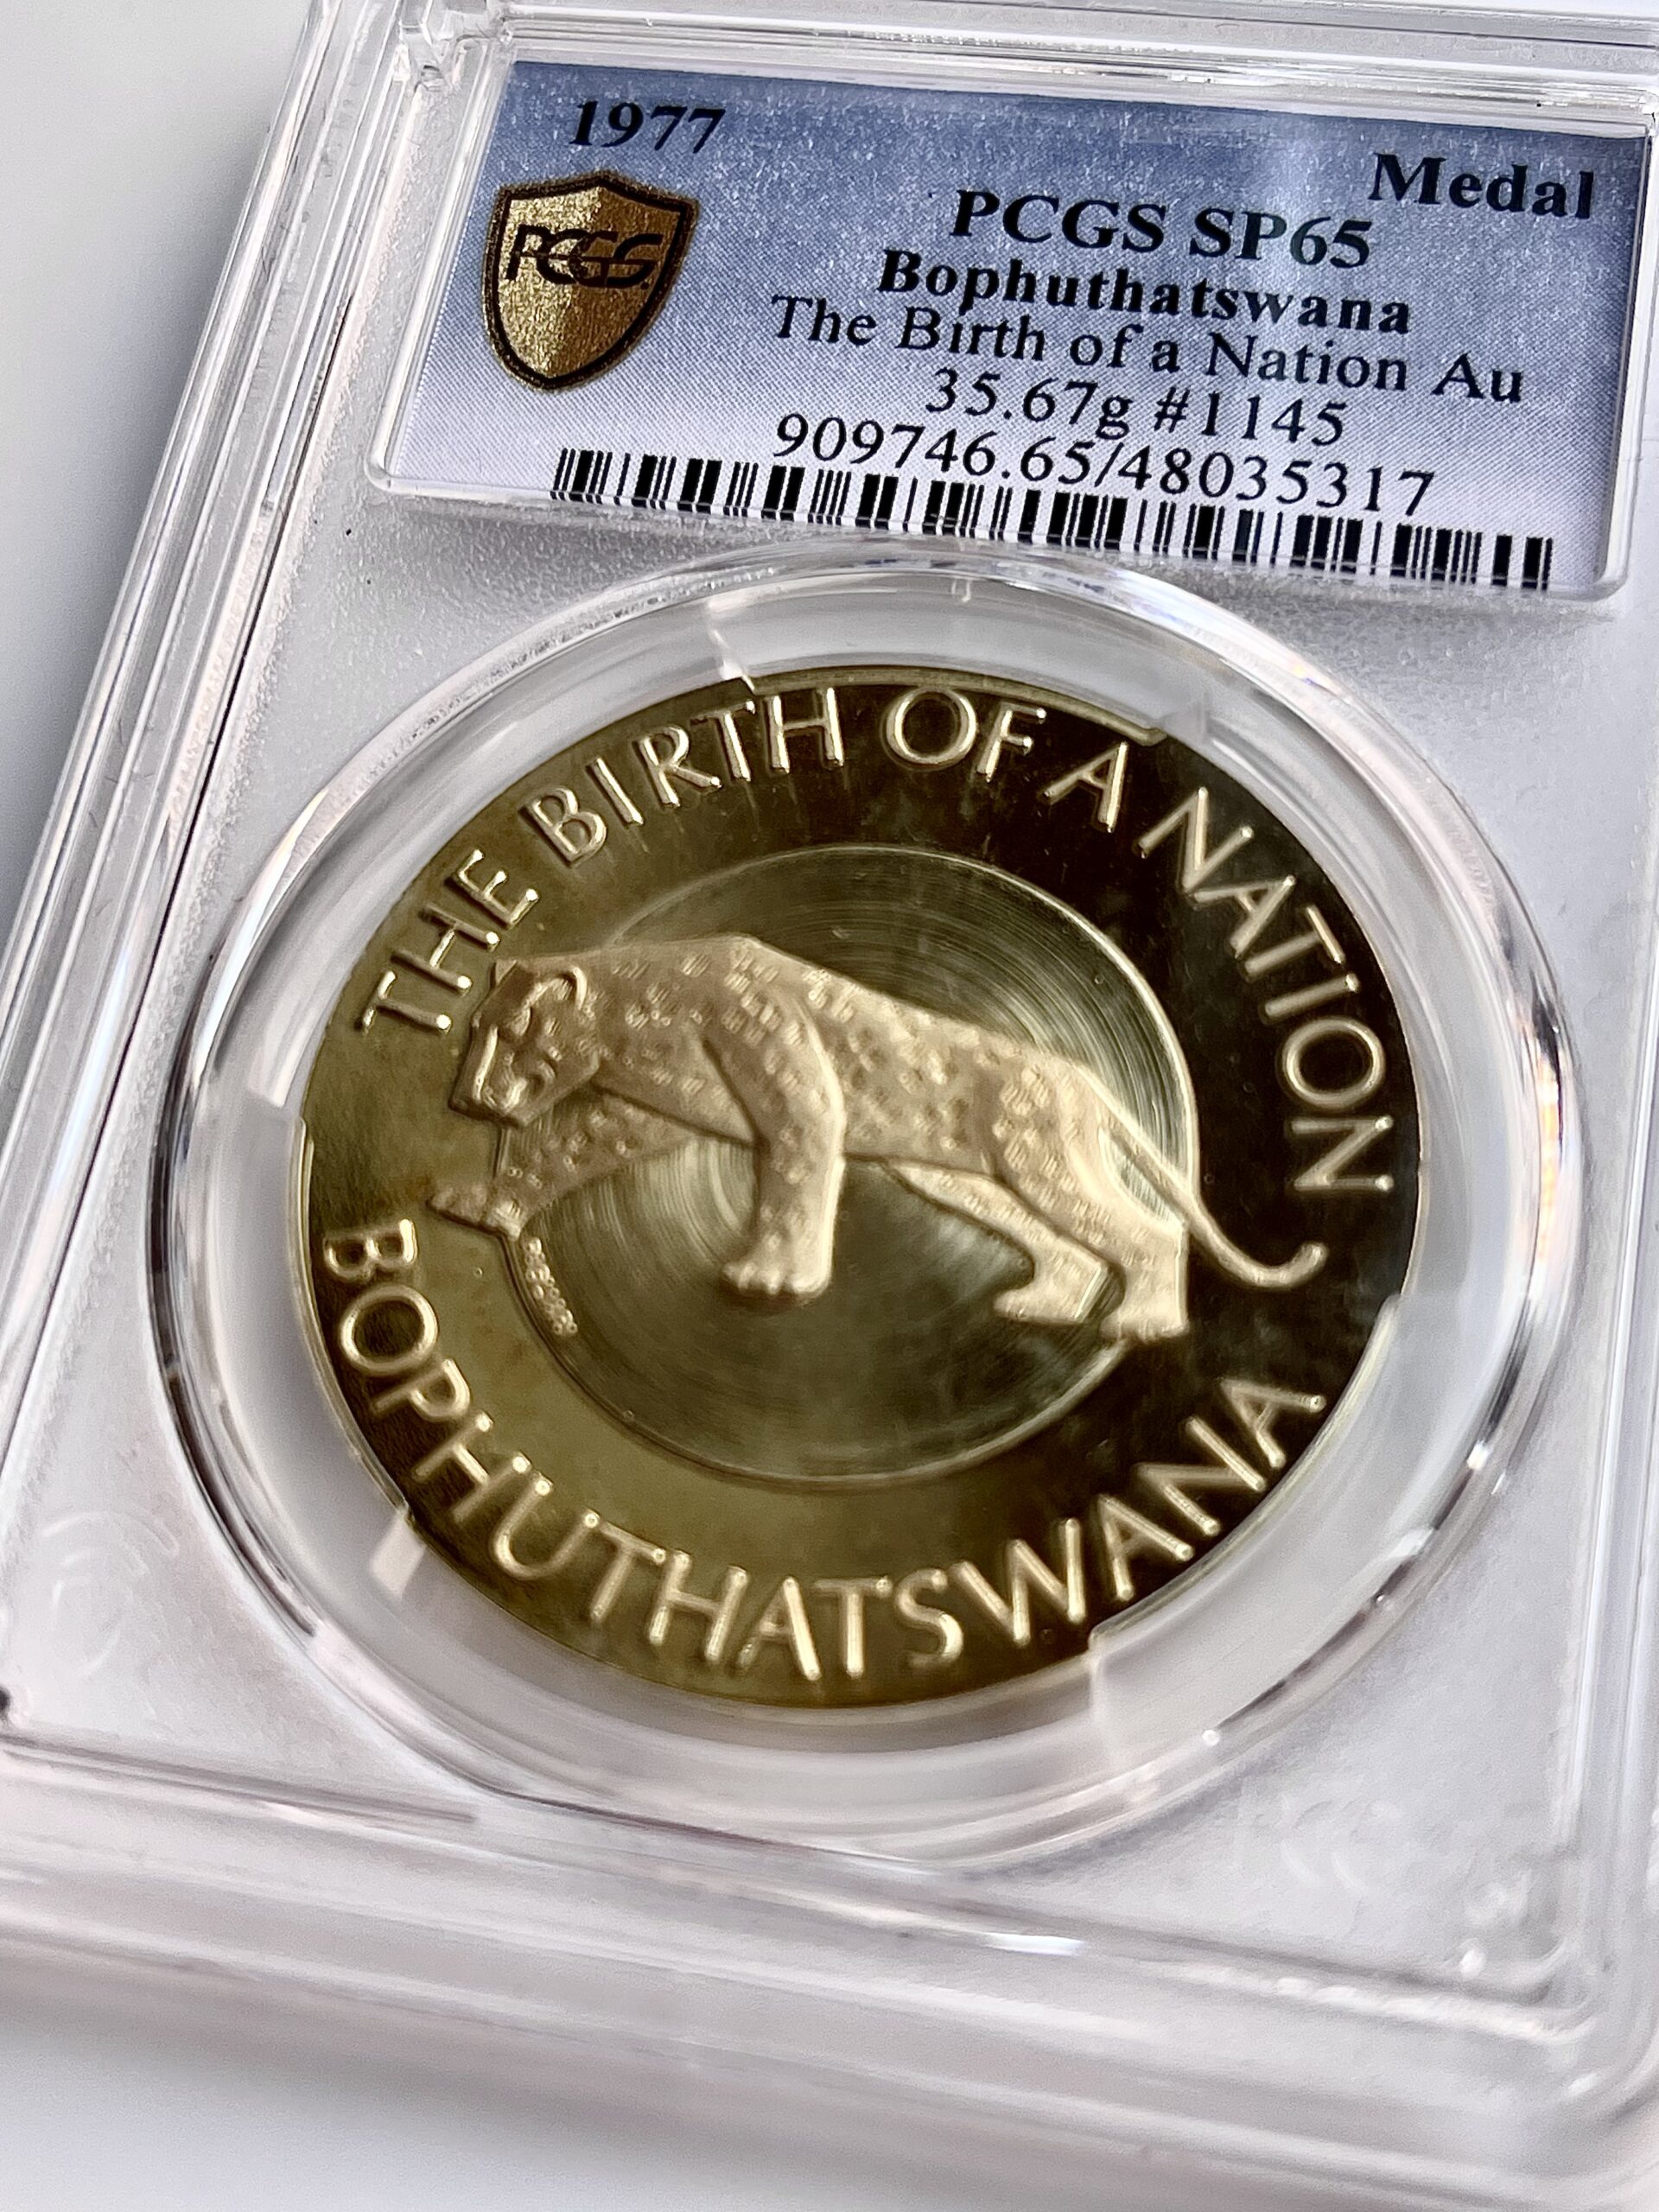 Bophuthatswana 1977 the birth of a nation-Gold Medaillon PCGS SP65